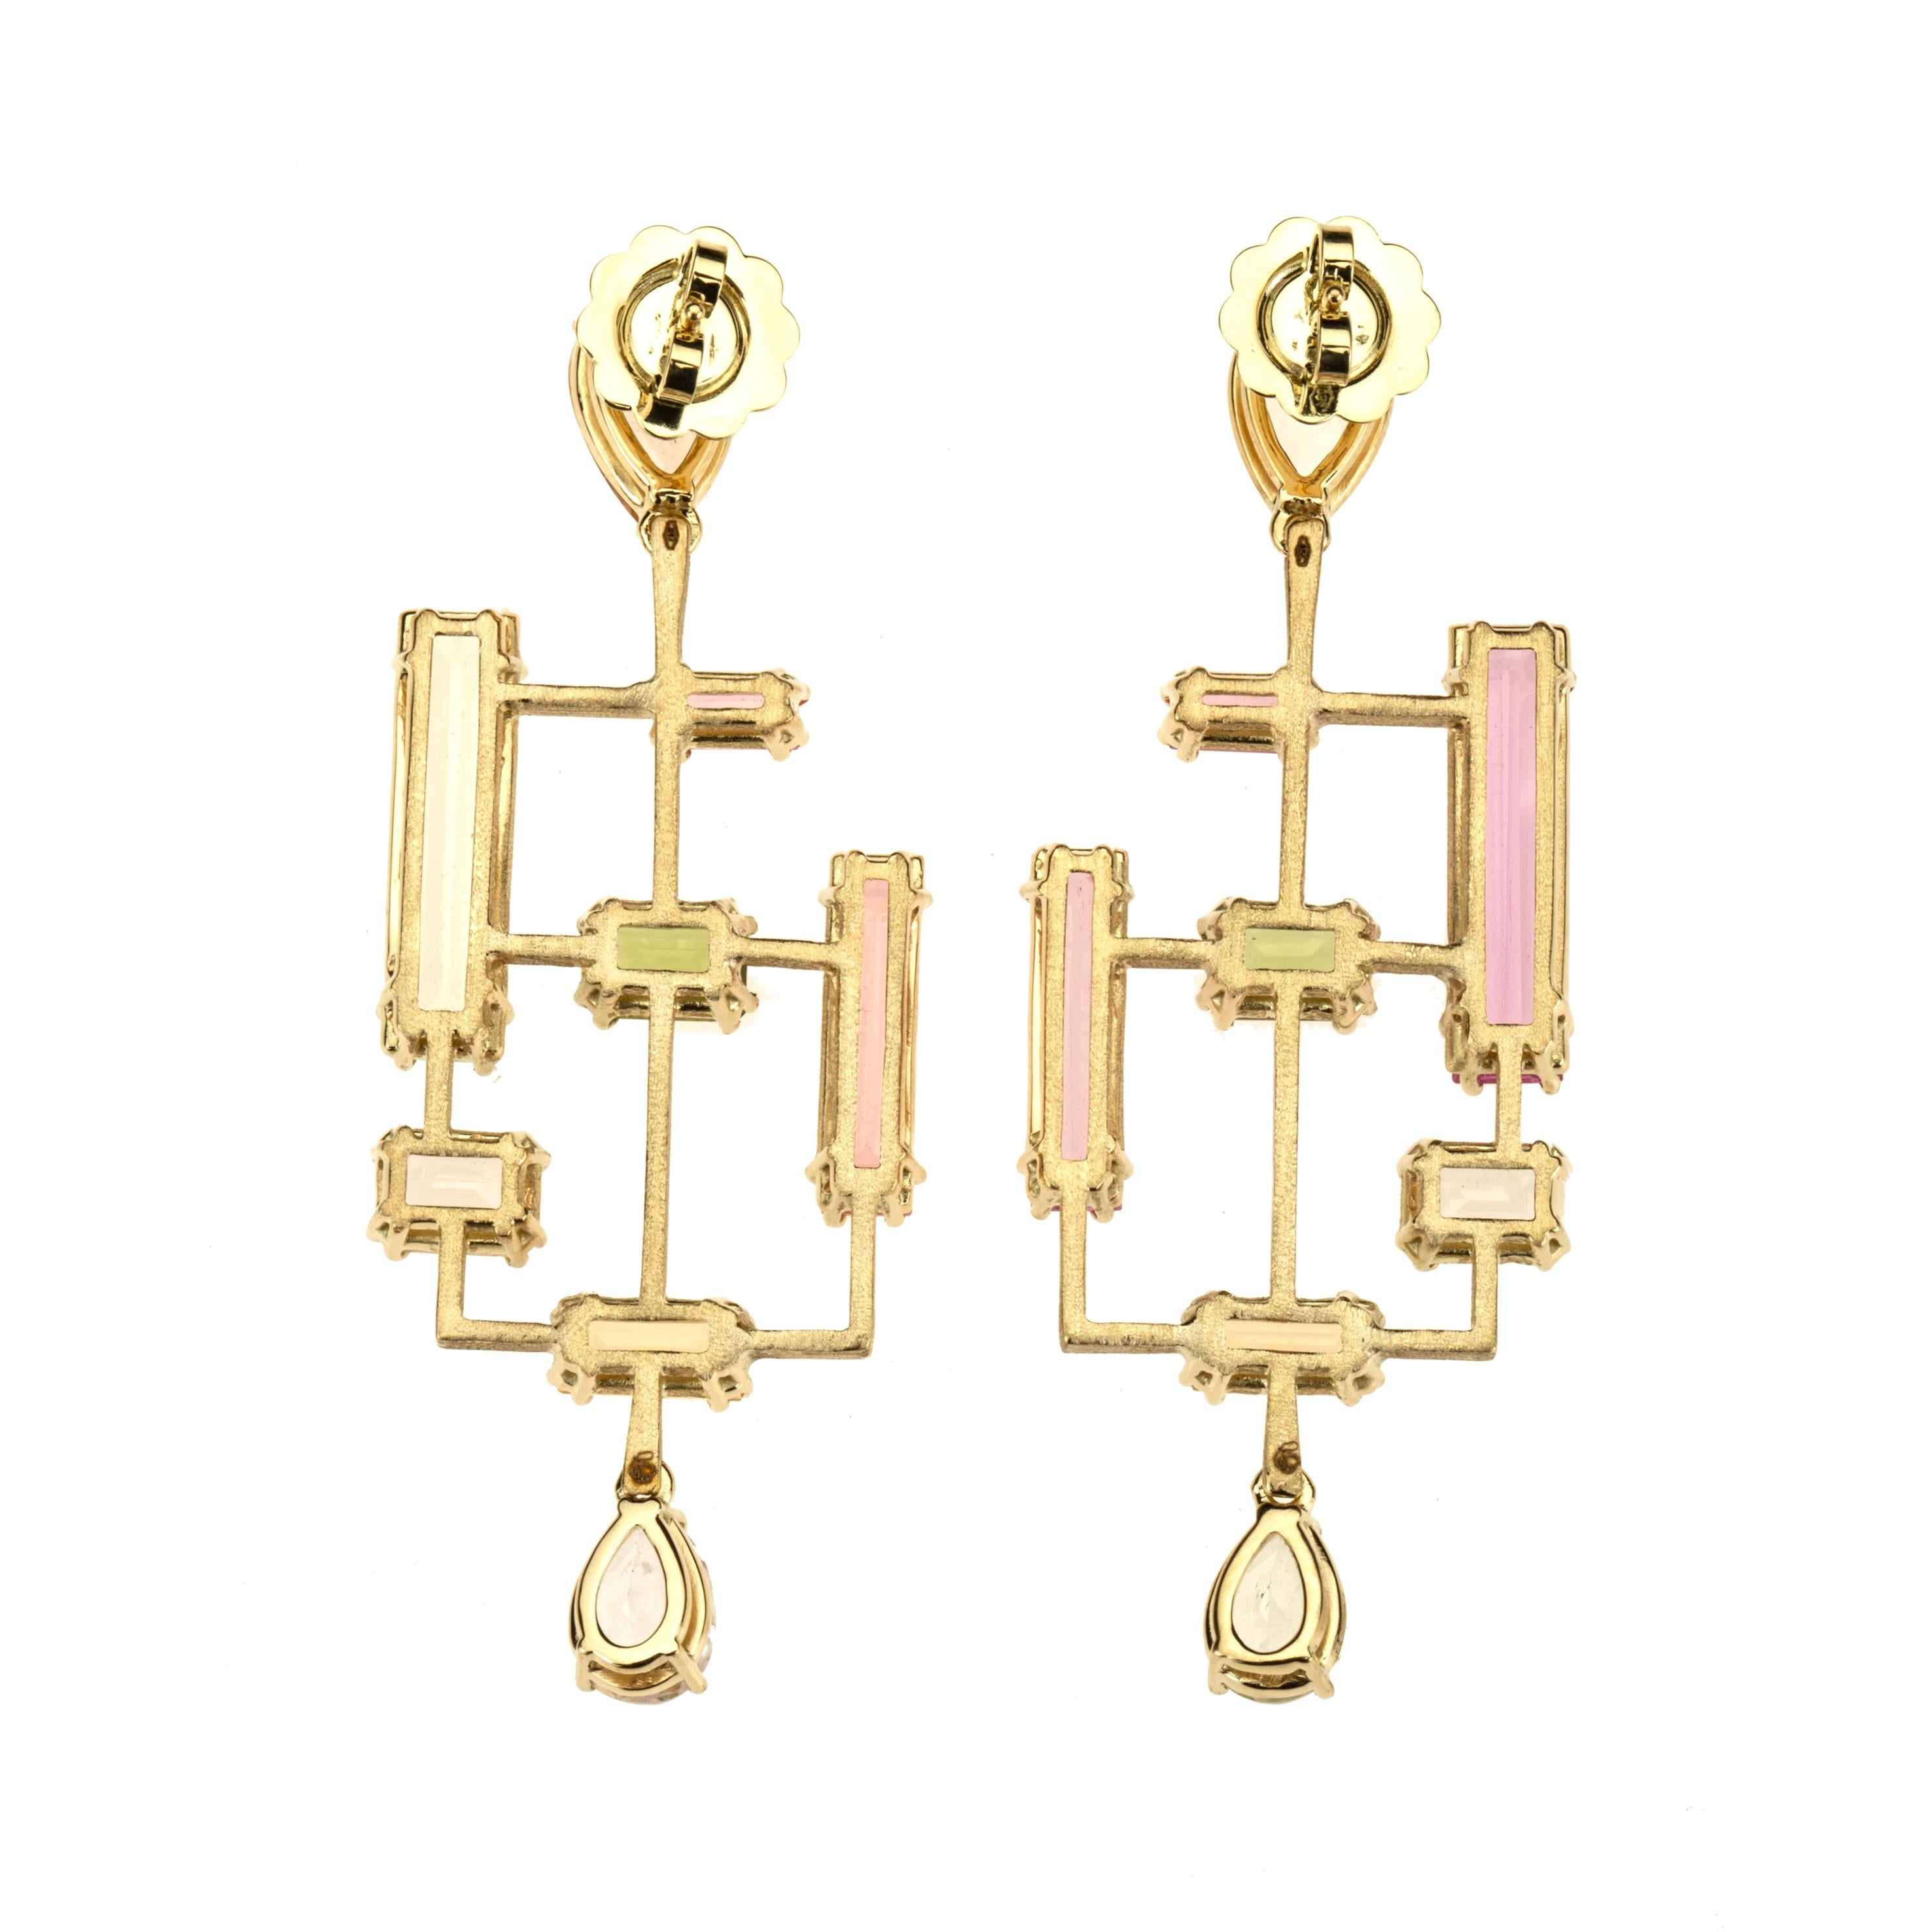 18 K Gold gr. 20,90 Tourmaline Peridot Sapphire Mondrian Earrings cts 6,90.
All Giulia Colussi jewelry is new and has never been previously owned or worn. Each item will arrive at your door beautifully gift wrapped in our boxes, put inside an